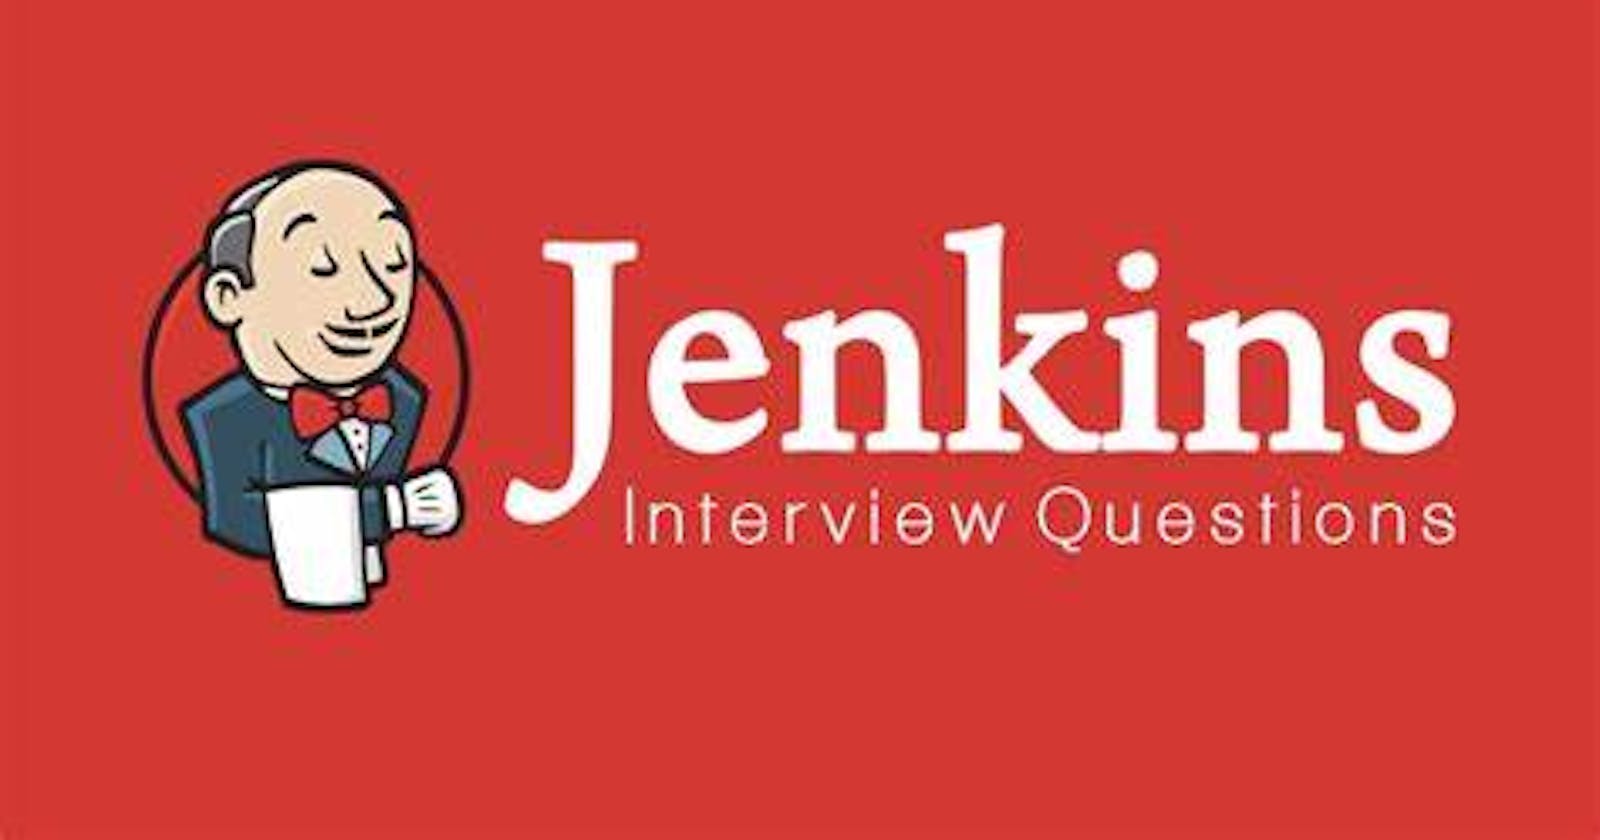 Jenkins Interview Questions and Answers | Day 29 of 90 Days of DevOps